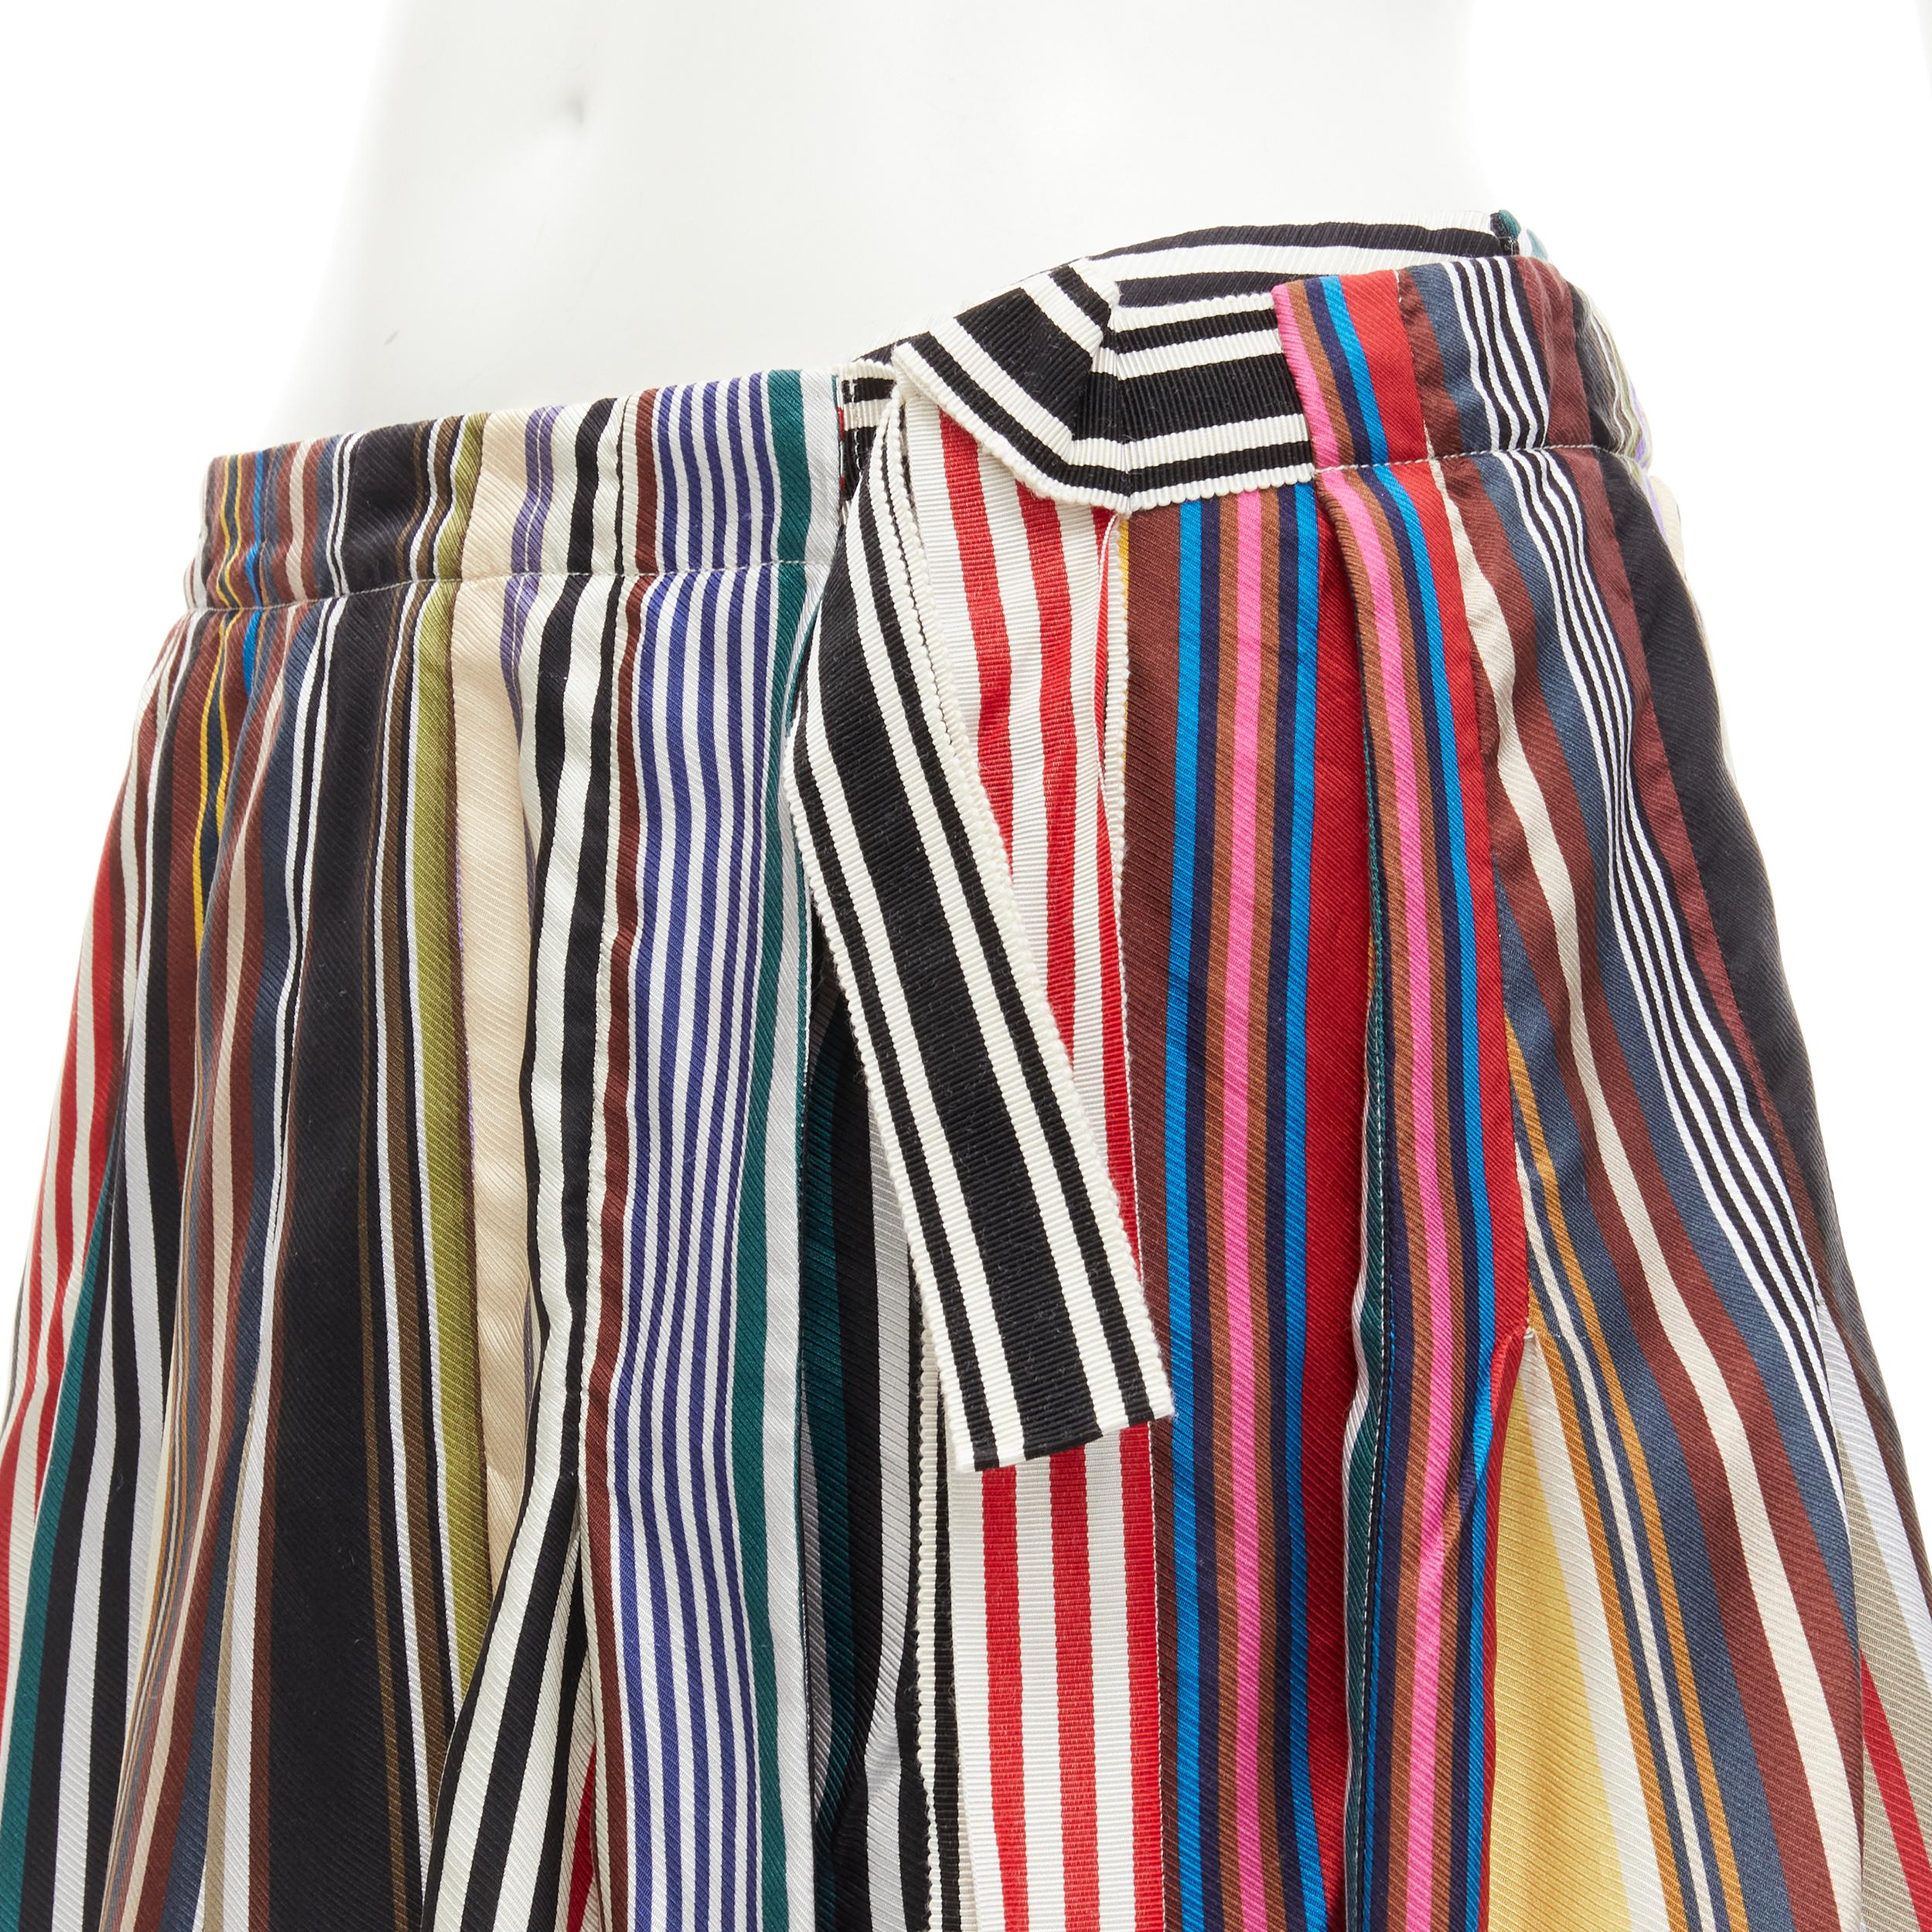 MONSE rainbow striped silk belted front asymmetric skirt US6 M
Brand: Monse
Material: Silk
Color: Multicolour
Pattern: Striped
Closure: Zip
Extra Detail: Boy shorts lining with wrap outer skirt. Self tie belt.

CONDITION:
Condition: Excellent, this